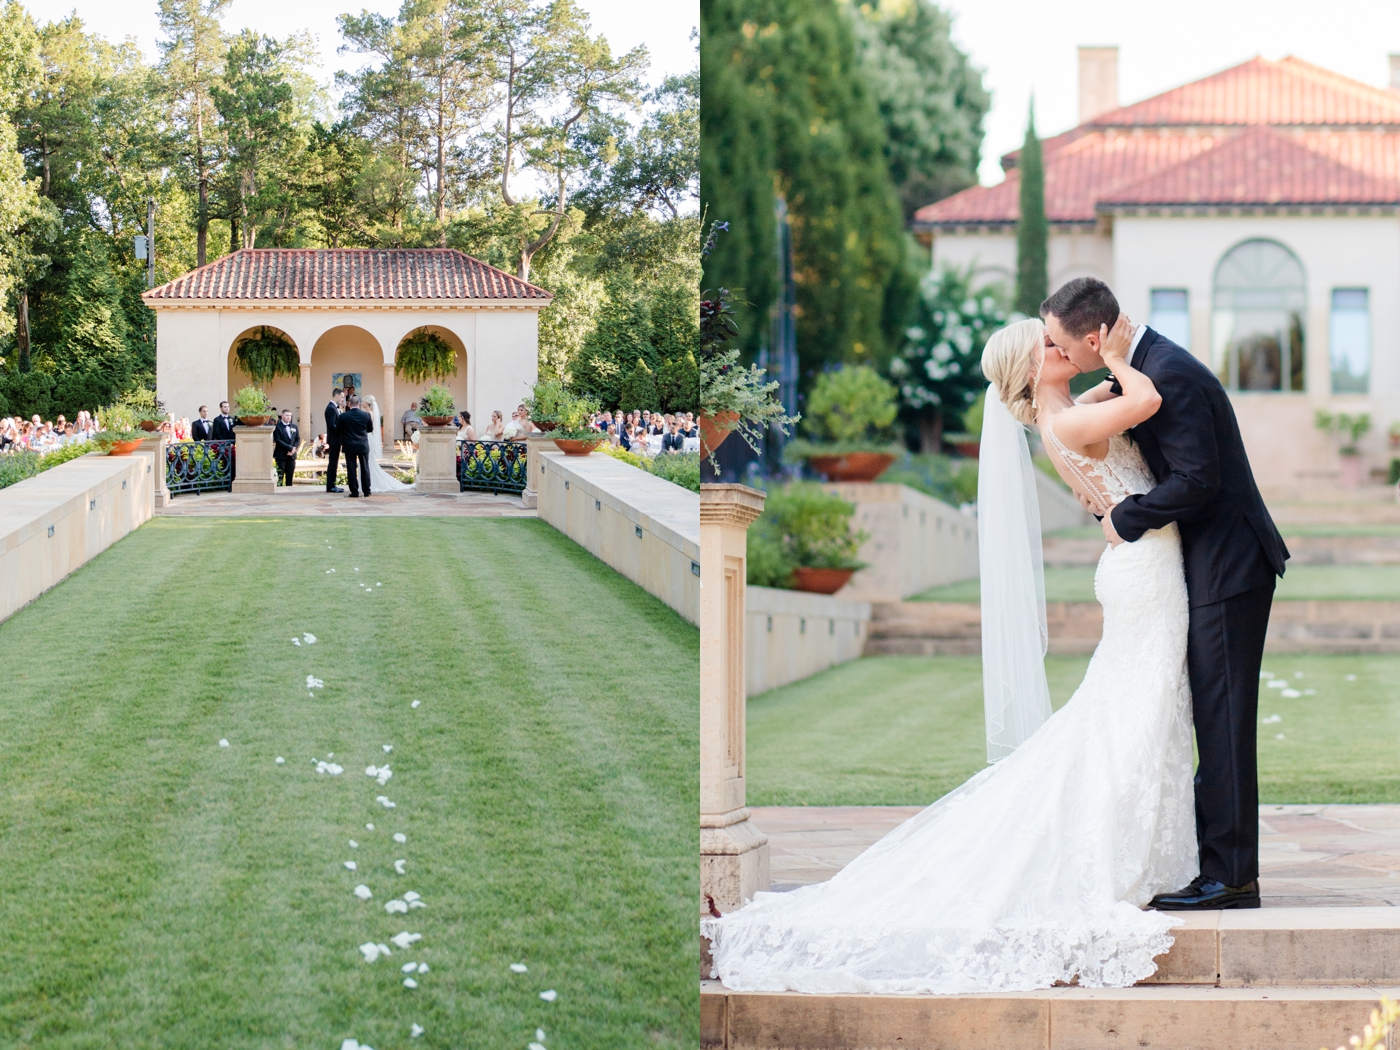 Outdoor wedding ceremony at Philbrook Museum of Art